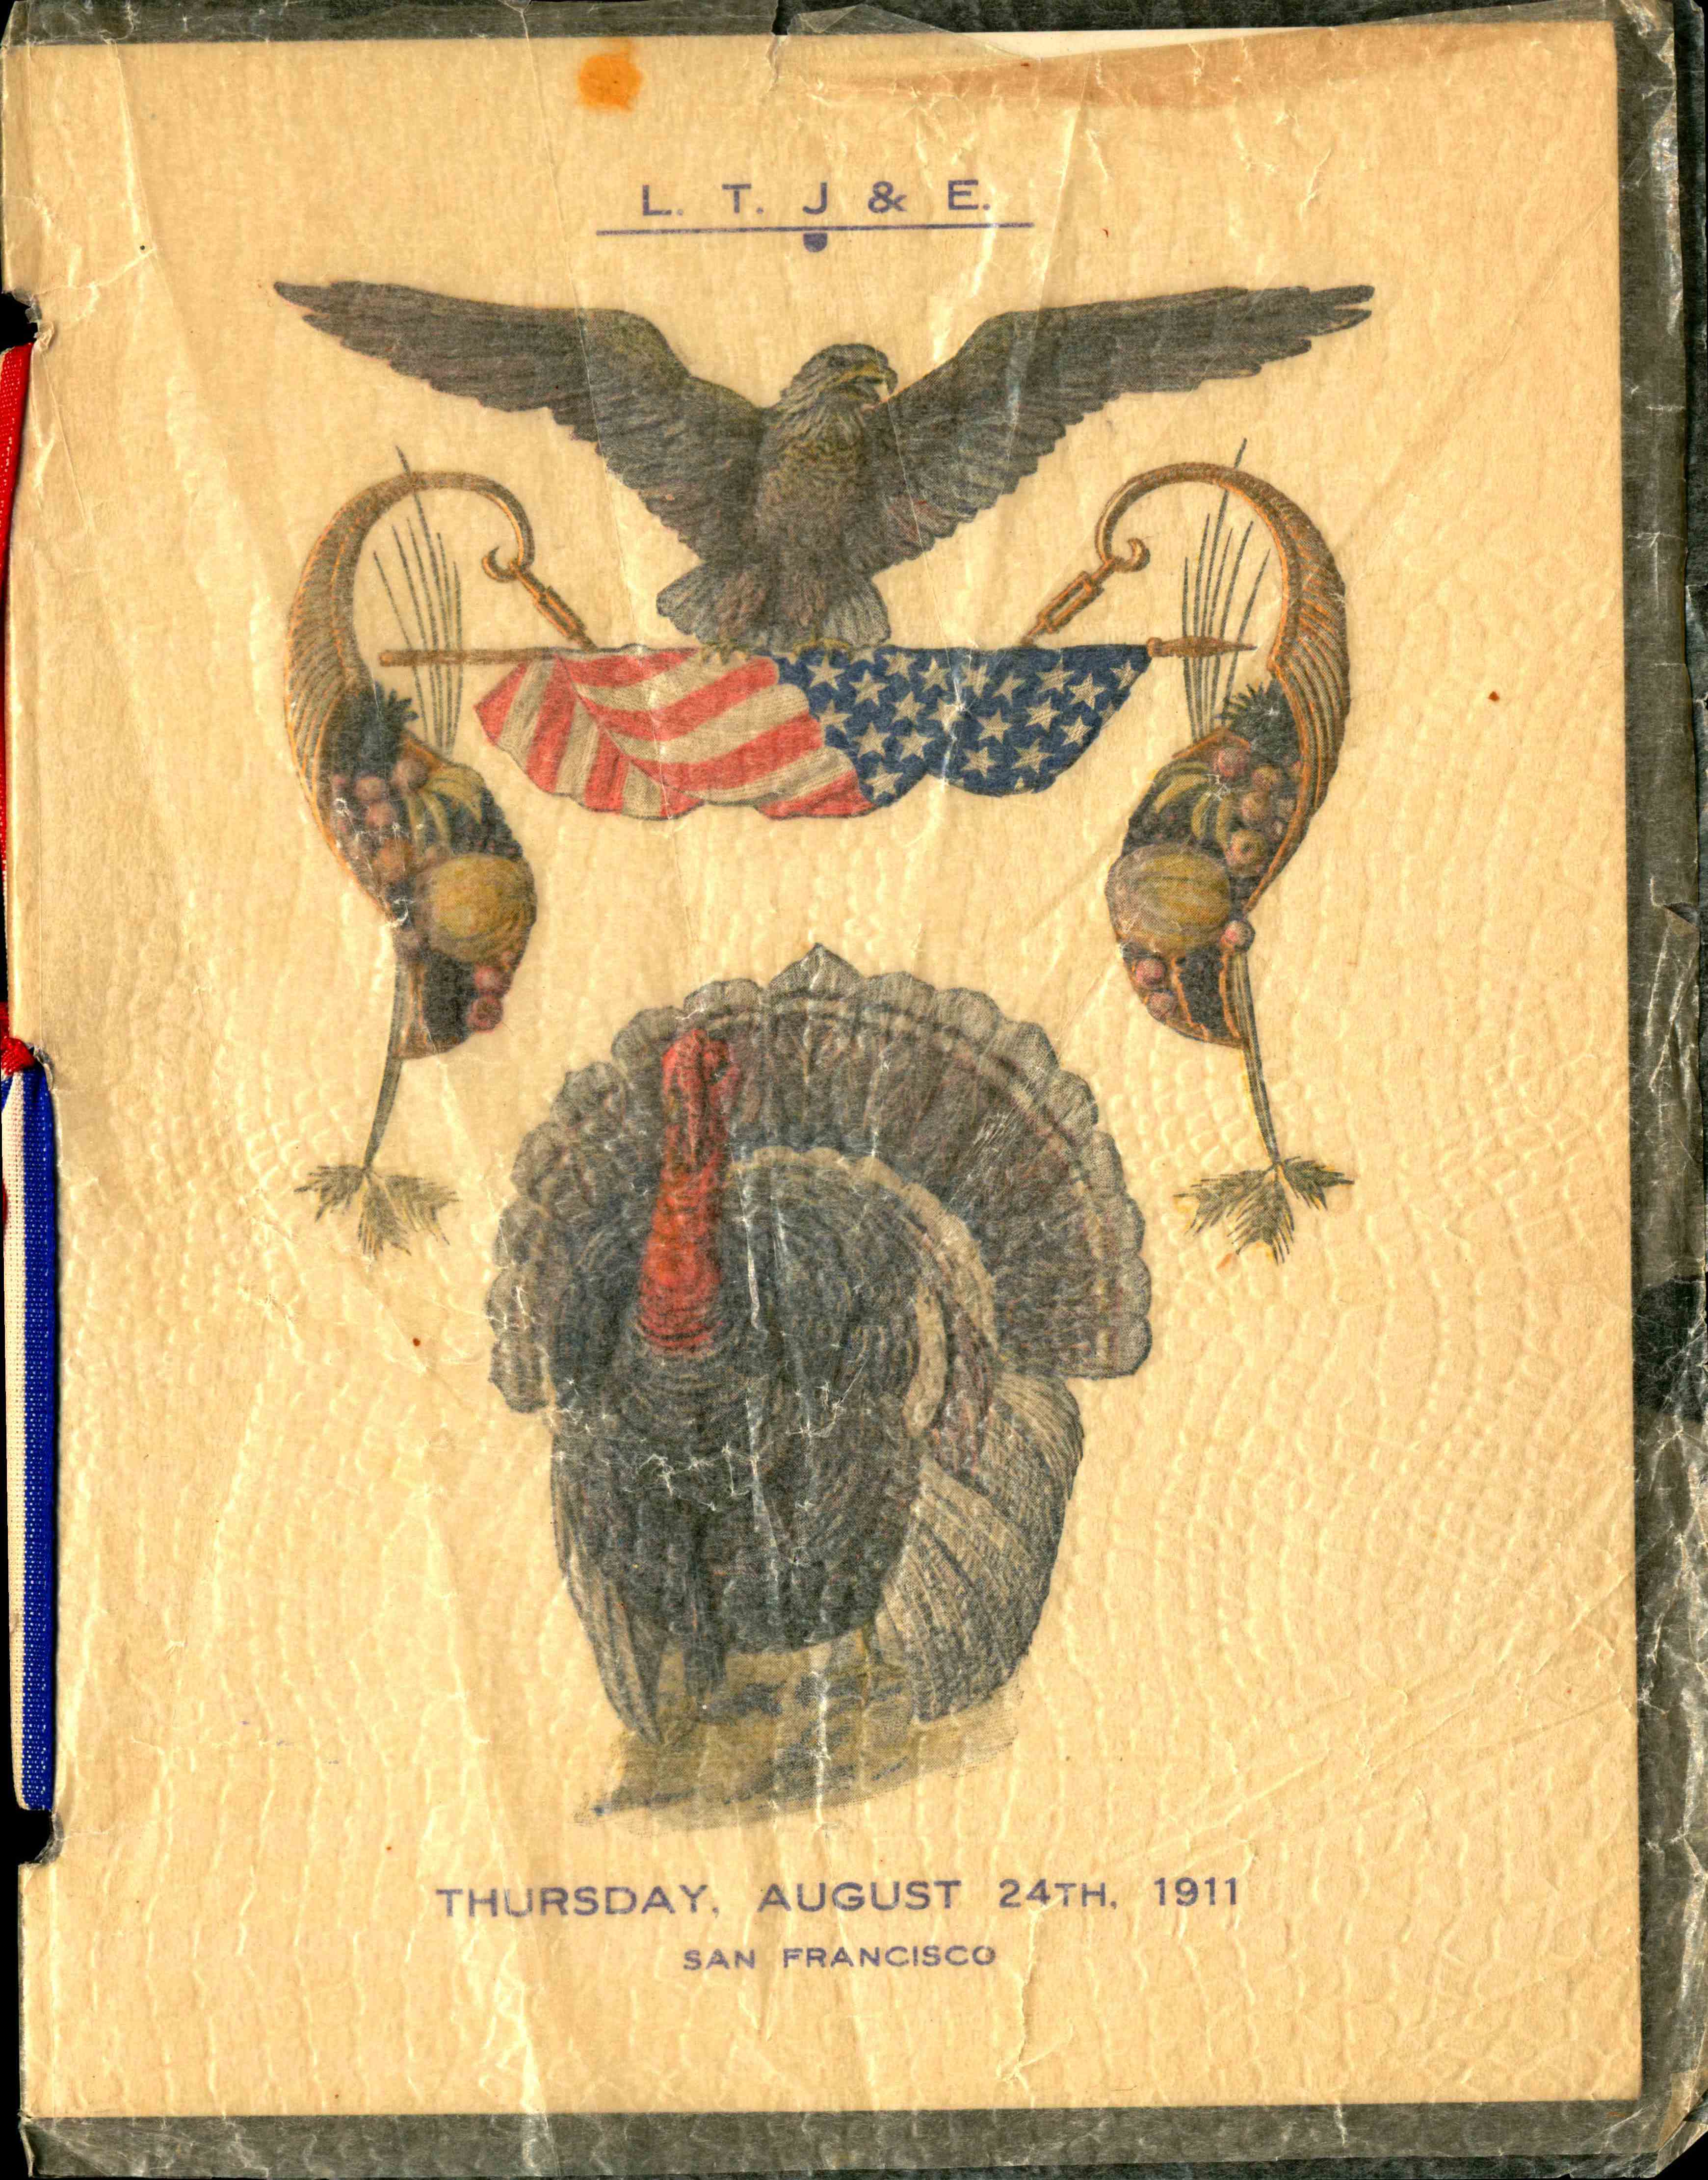 A turkey and bald eagle on the front of menu